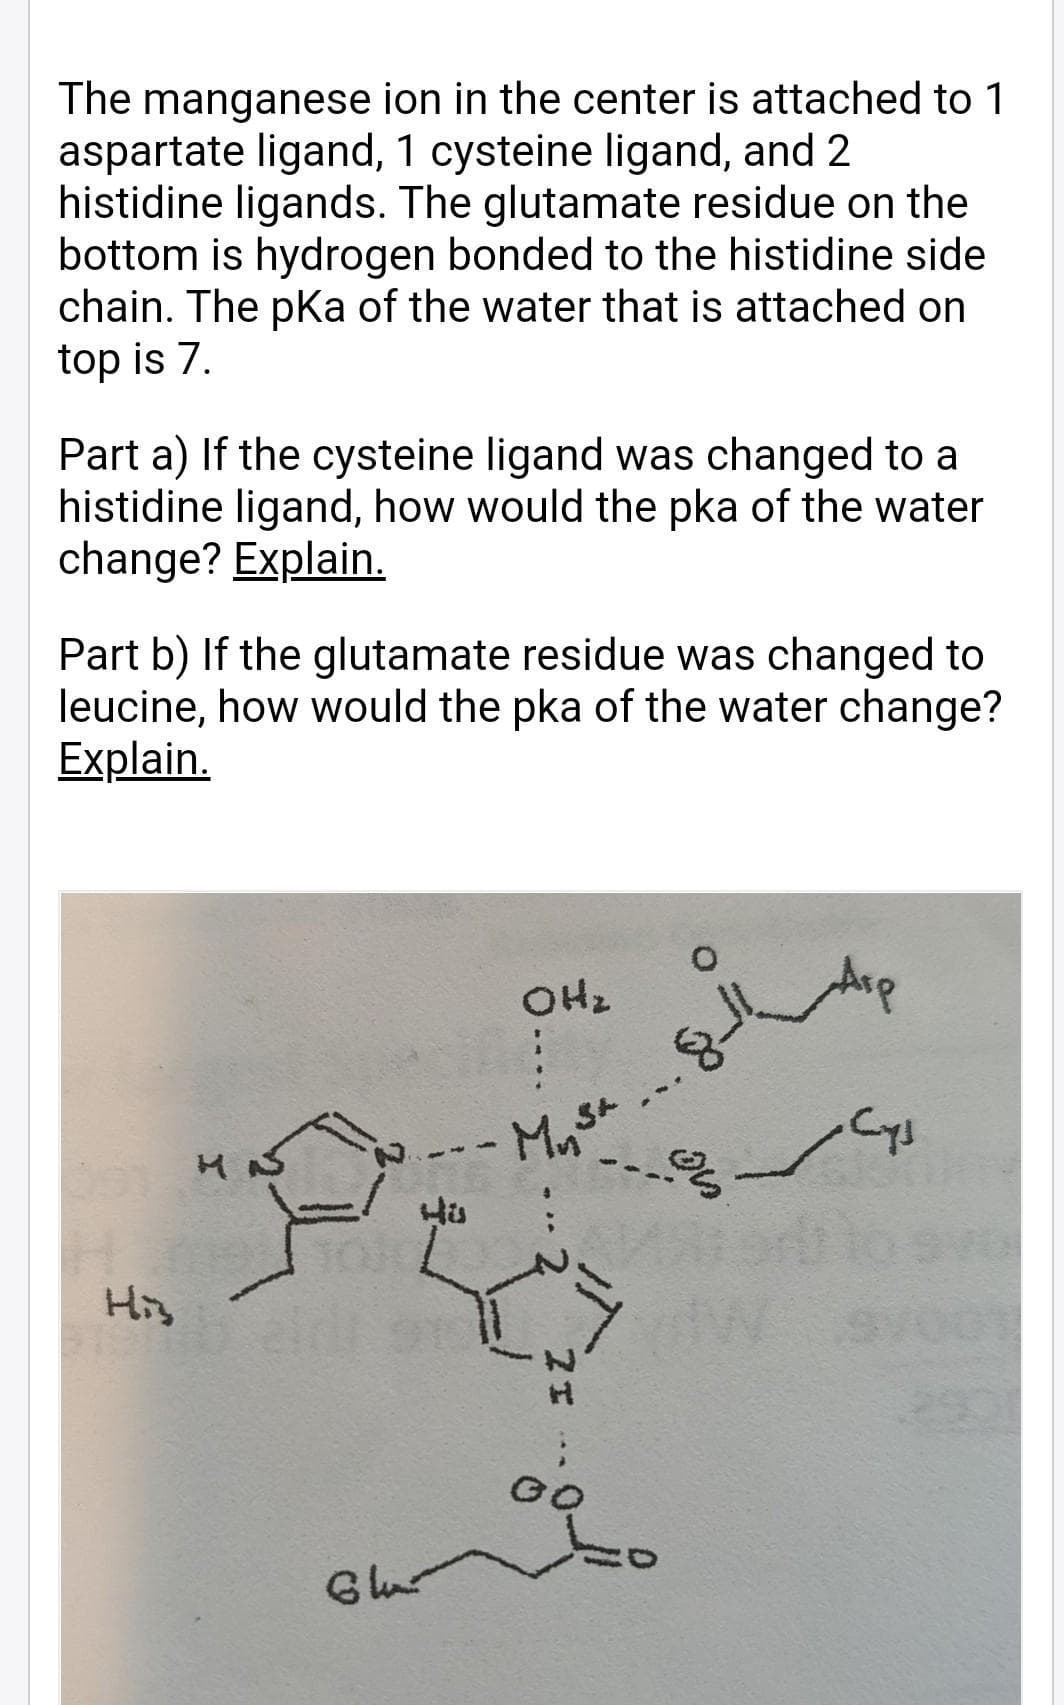 The manganese ion in the center is attached to 1
aspartate ligand, 1 cysteine ligand, and 2
histidine ligands. The glutamate residue on the
bottom is hydrogen bonded to the histidine side
chain. The pKa of the water that is attached on
top is 7.
Part a) If the cysteine ligand was changed to a
histidine ligand, how would the pka of the water
change? Explain.
Part b) If the glutamate residue was changed to
leucine, how would the pka of the water change?
Explain.
OHz
His
